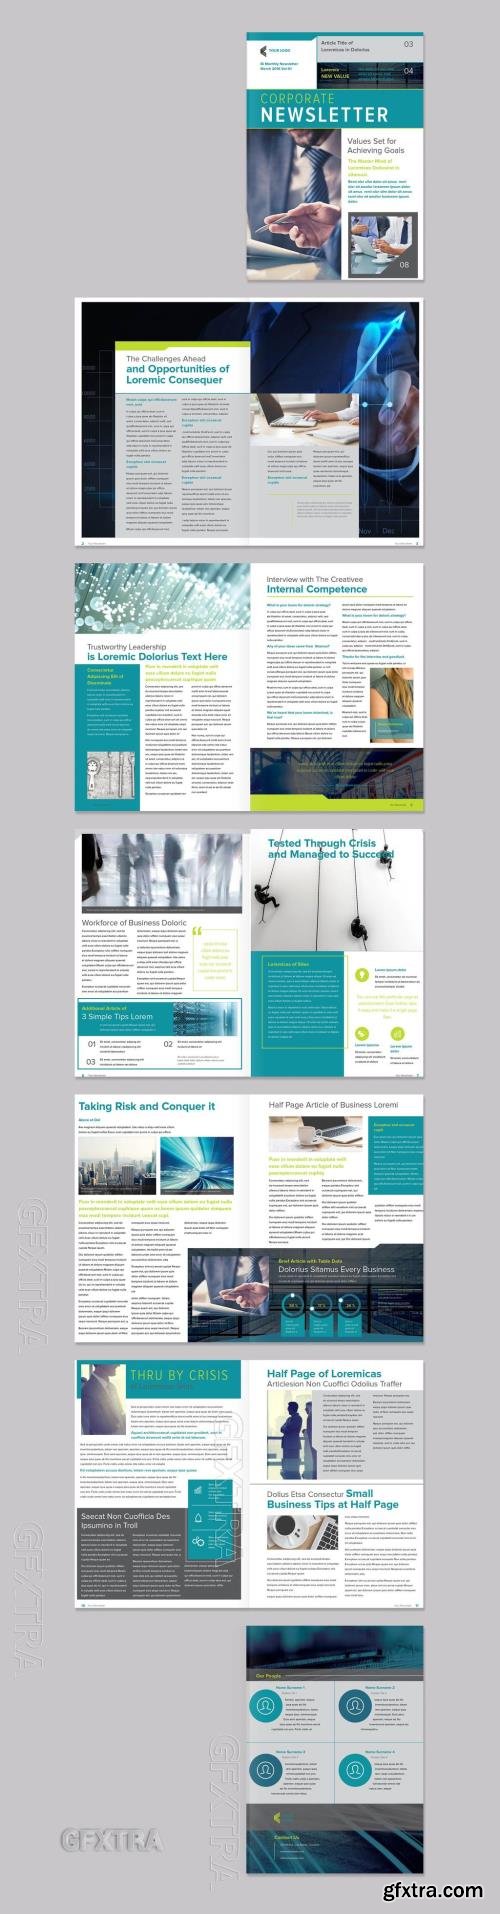 Newsletter Layout with Turquoise Accents 220996950